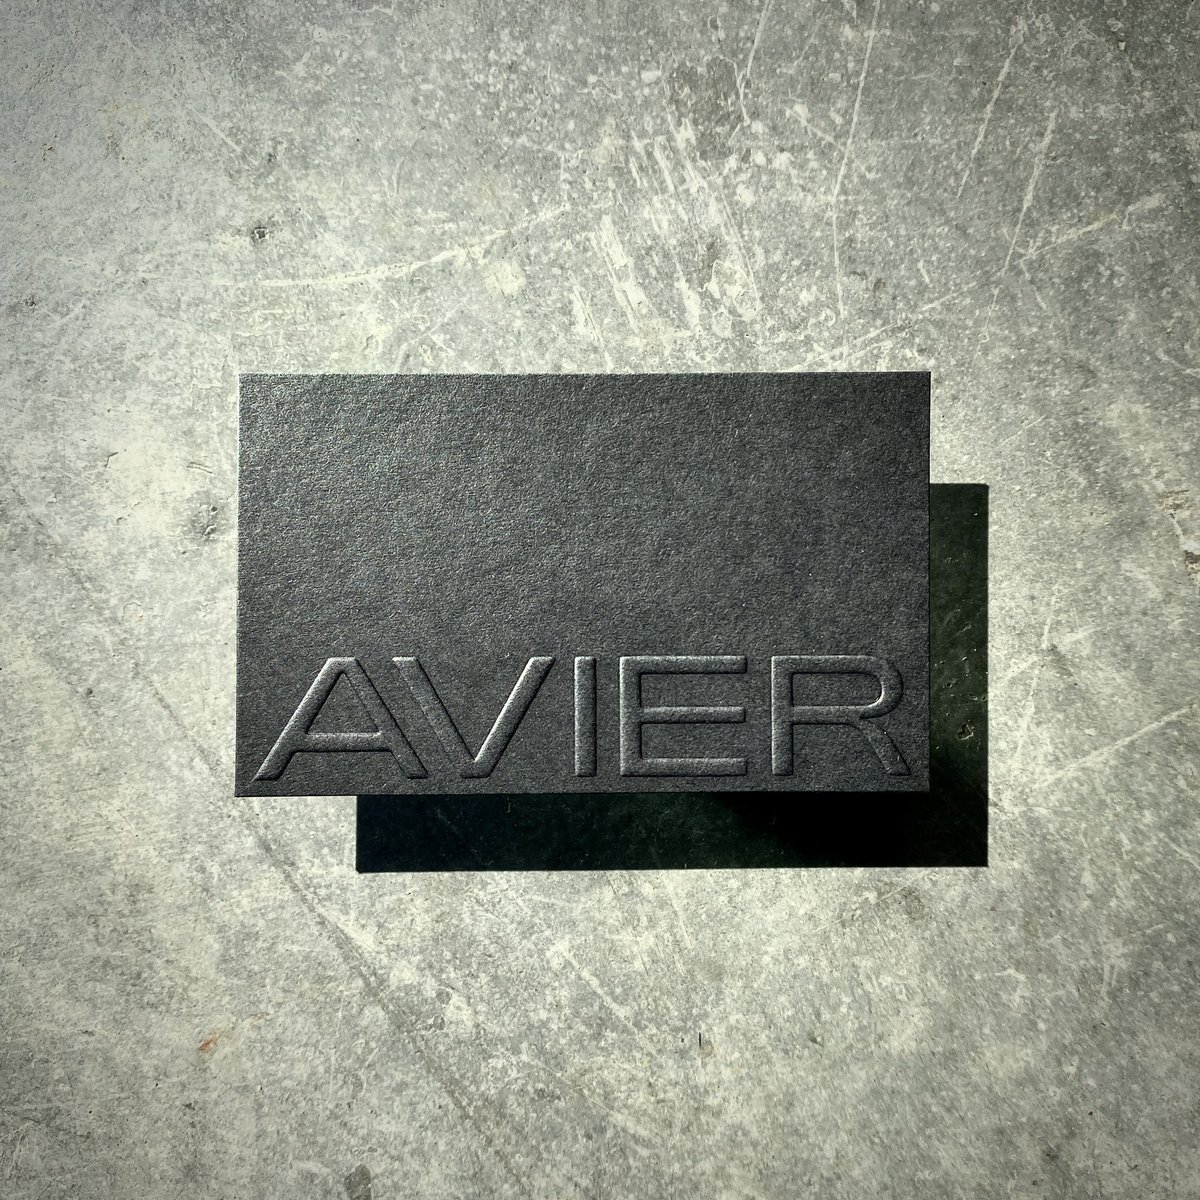 AVIER Business cards.
Blind Embossed logo front, White Foiled text back on Colorplan Ebony Black 270gsm and Duplexed to 540gsm card to hide the emboss on the back 

#avier #businesscards #businesscard #duplex #foil #foiling #emboss #embossing #colorplan #taylordpress